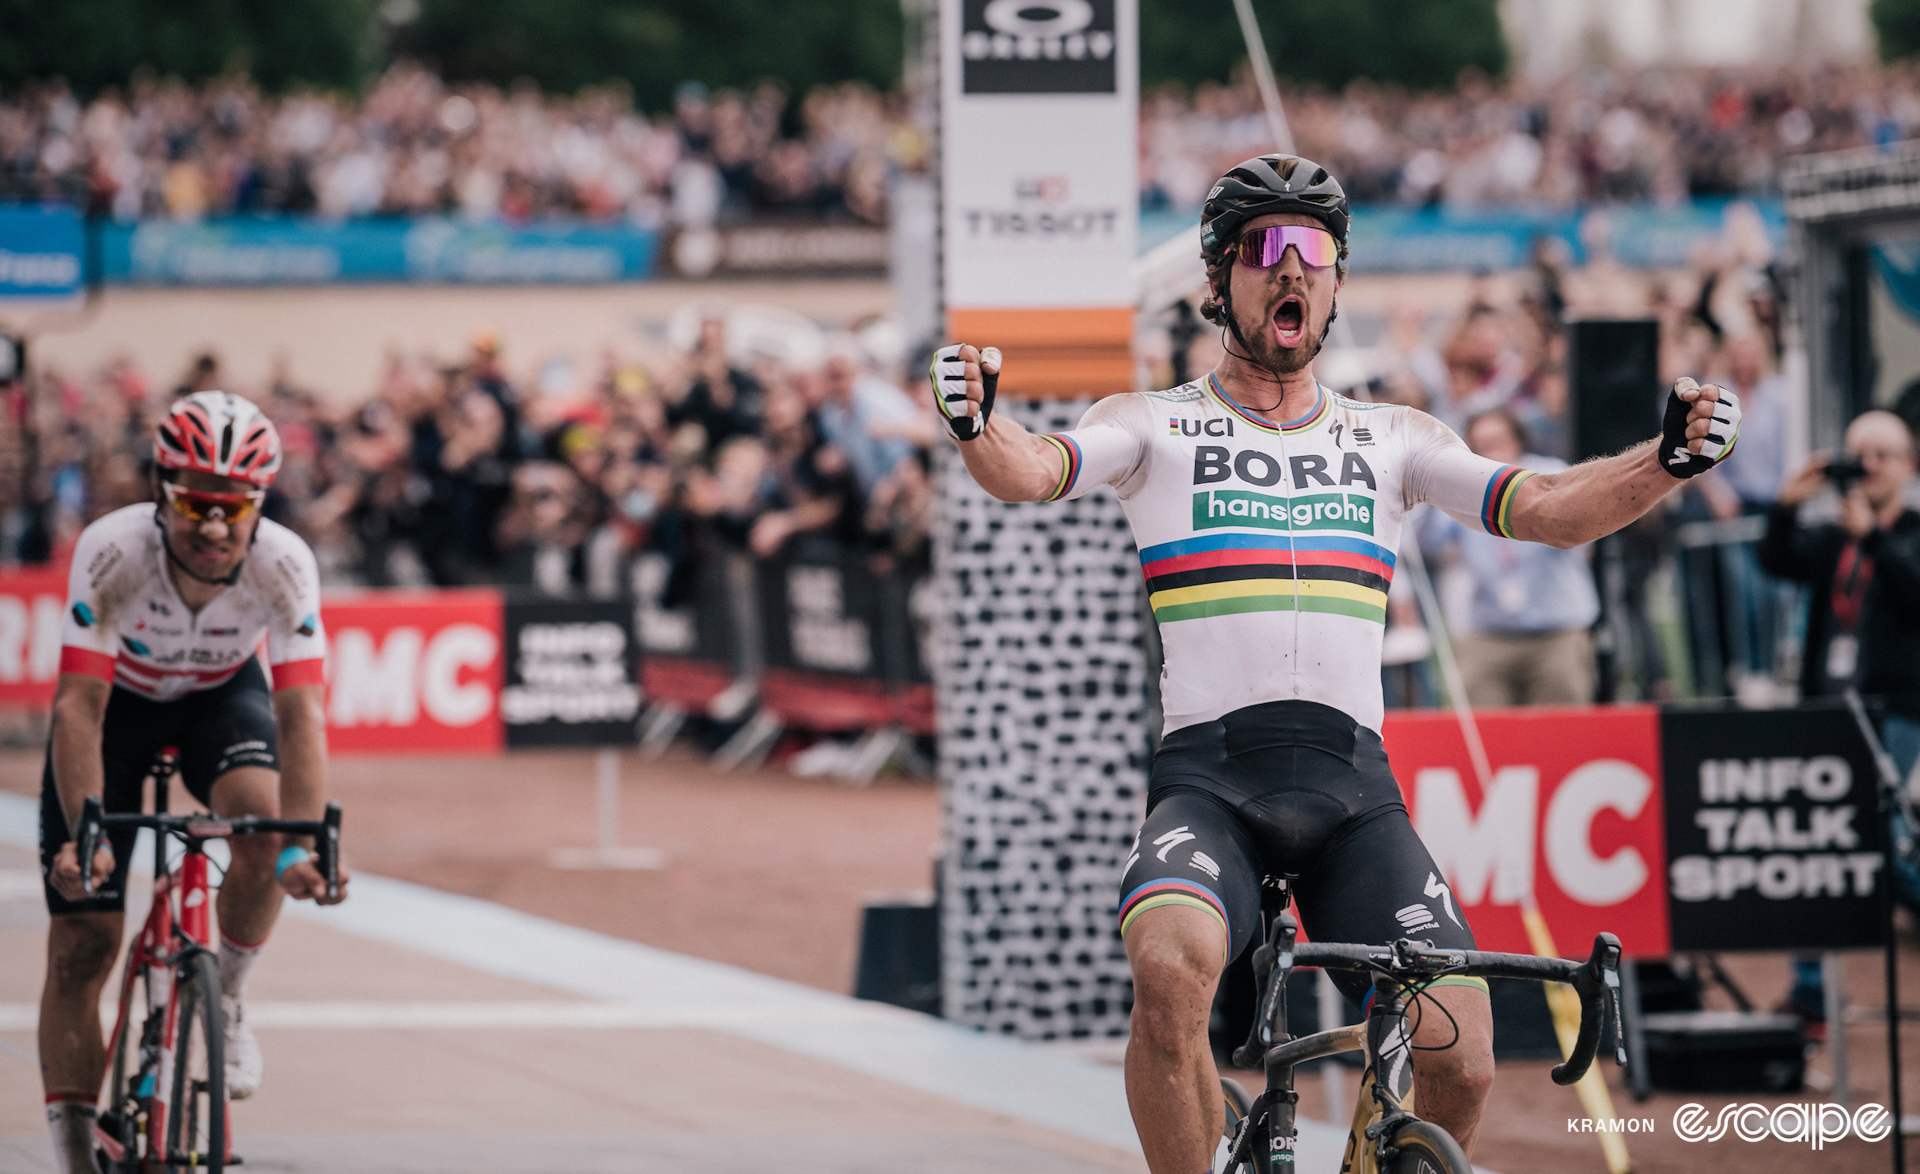 Peter Sagan celebrates winning the 2018 Paris-Roubaix on the Roubaix Velodrome with a loud yell and two outstretched fists.